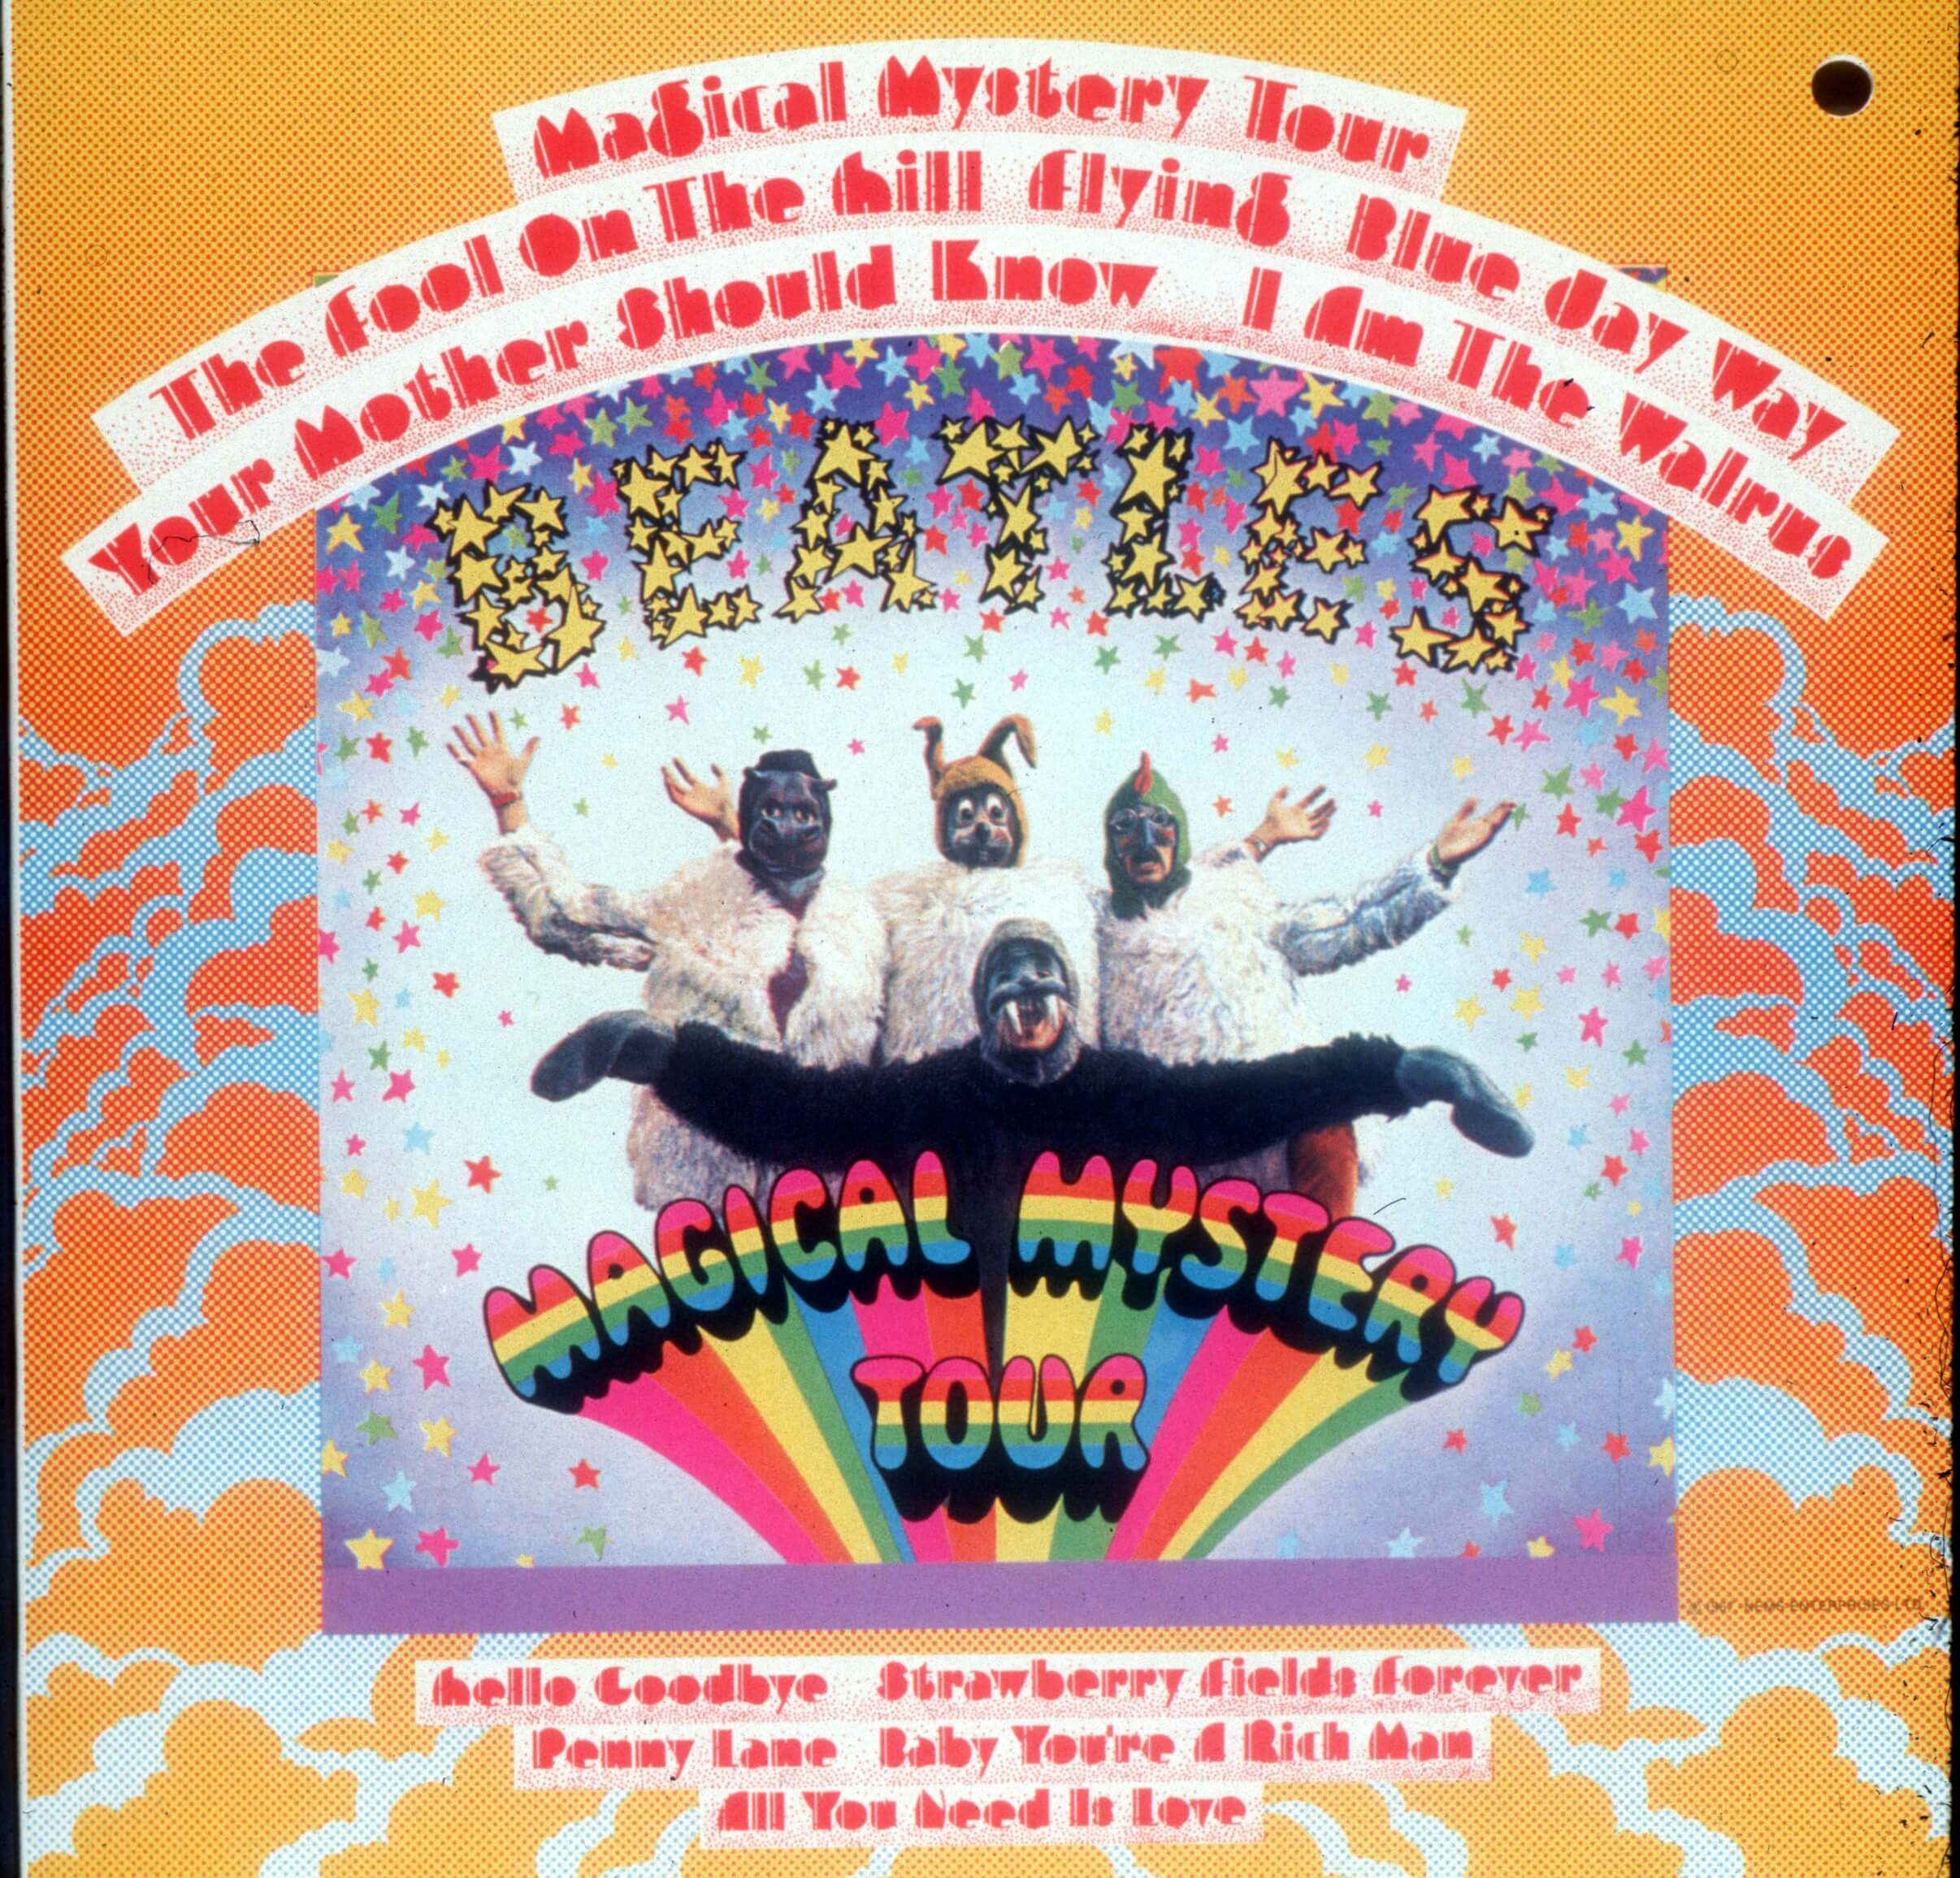 A vinyl copy of The Beatles' Magical Mystery Tour'